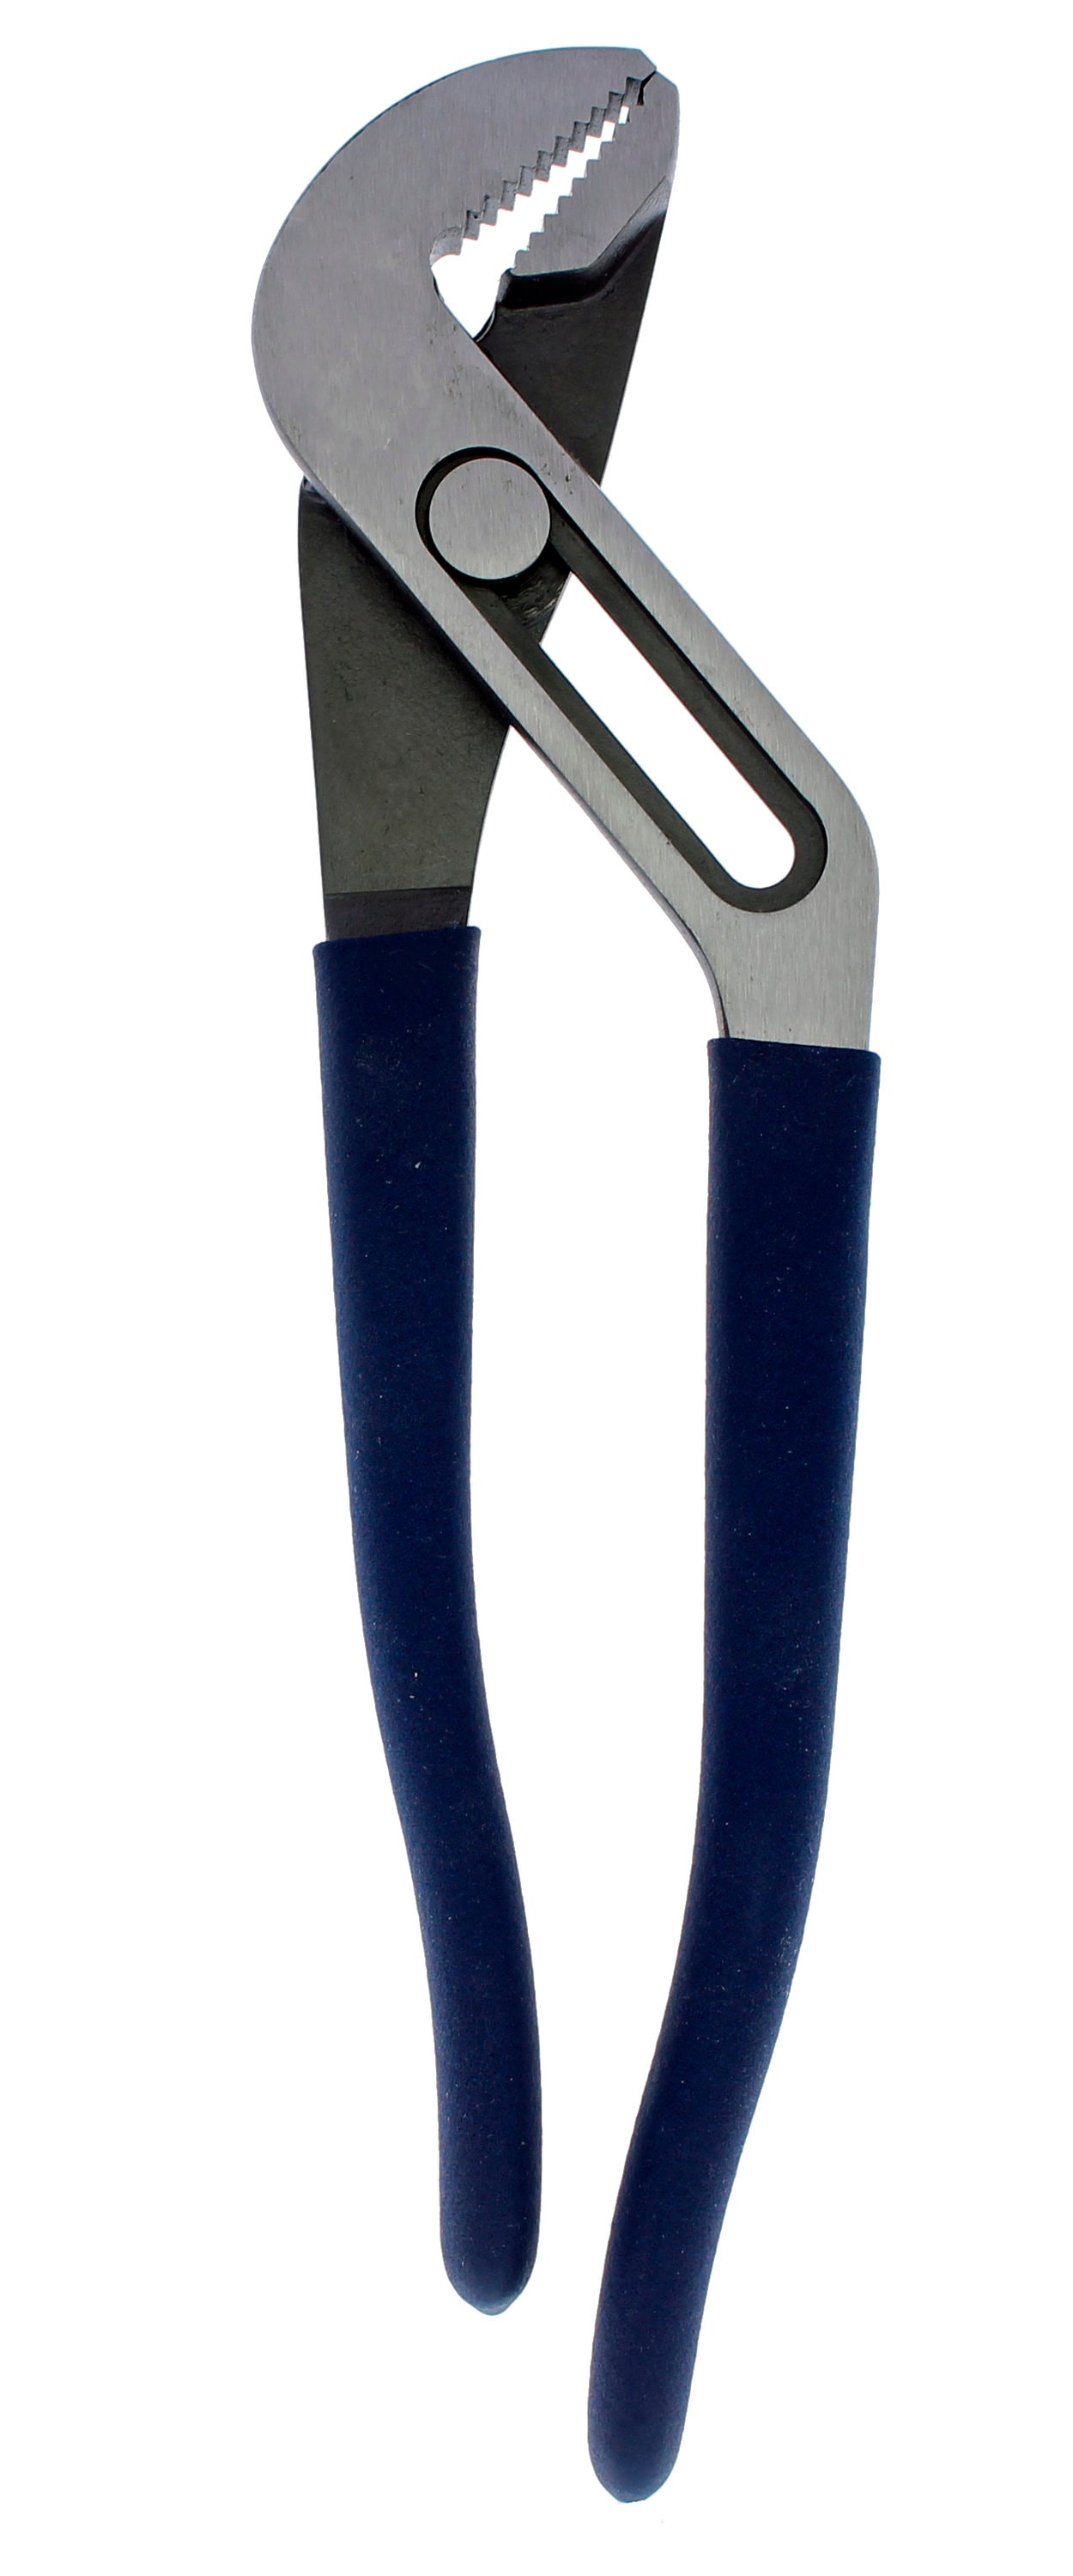 Straight High Carbon Steel Jaw 1-1/2 in 9-1/2 in OAL Ideal 35-420 Adjustable Tongue and Groove Plier